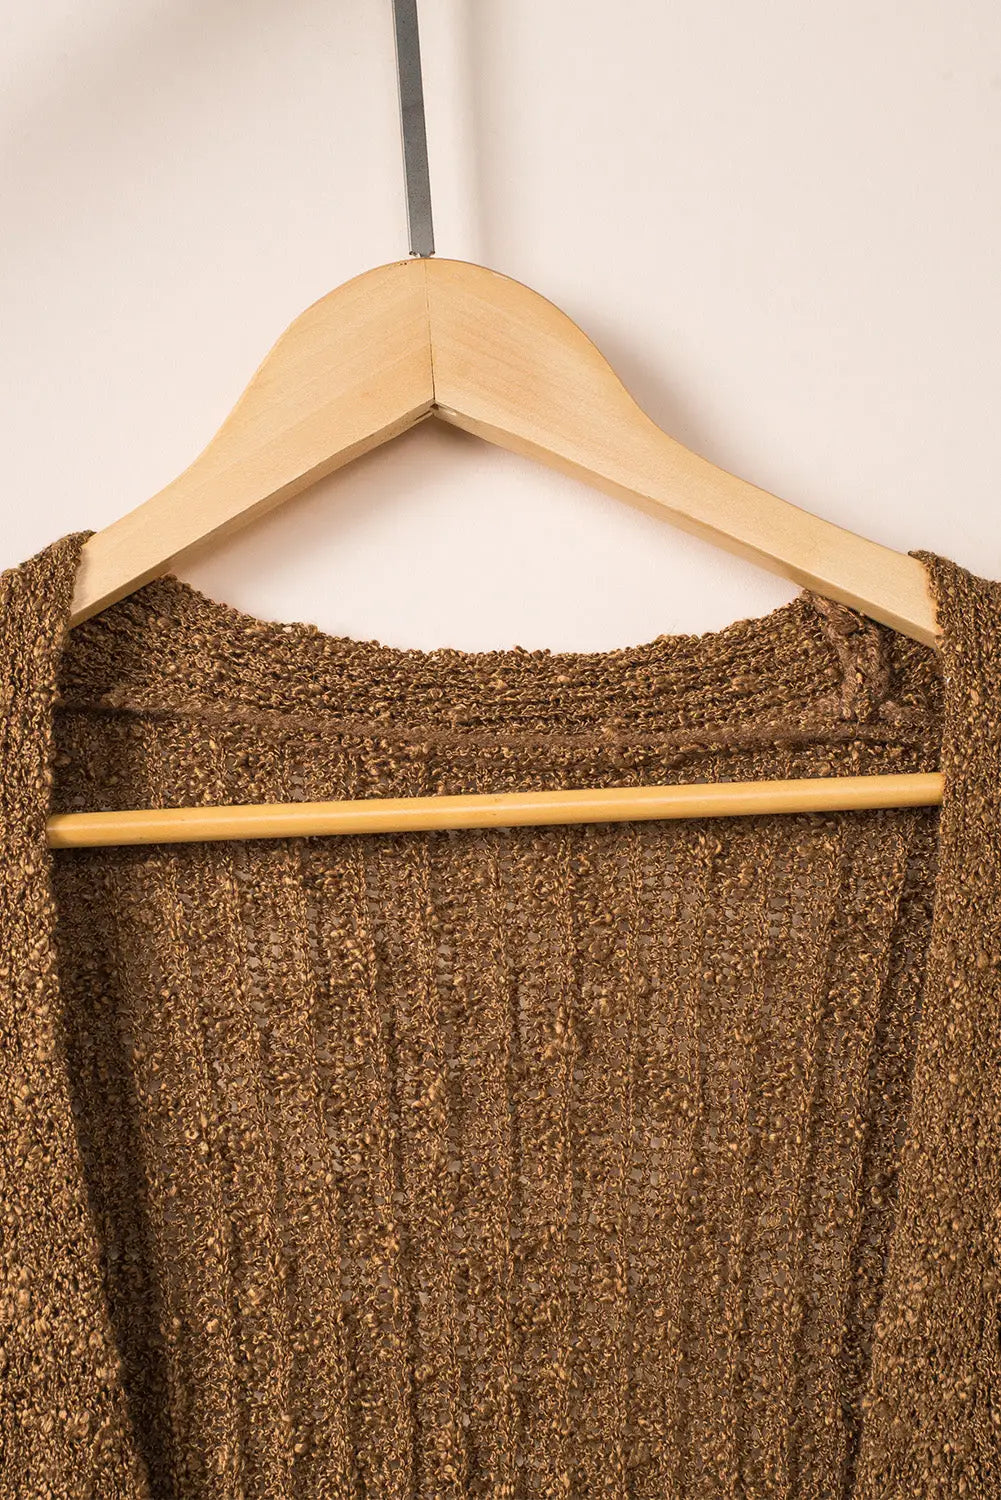 Brown open front drop shoulder knitted cardigan - sweaters & cardigans